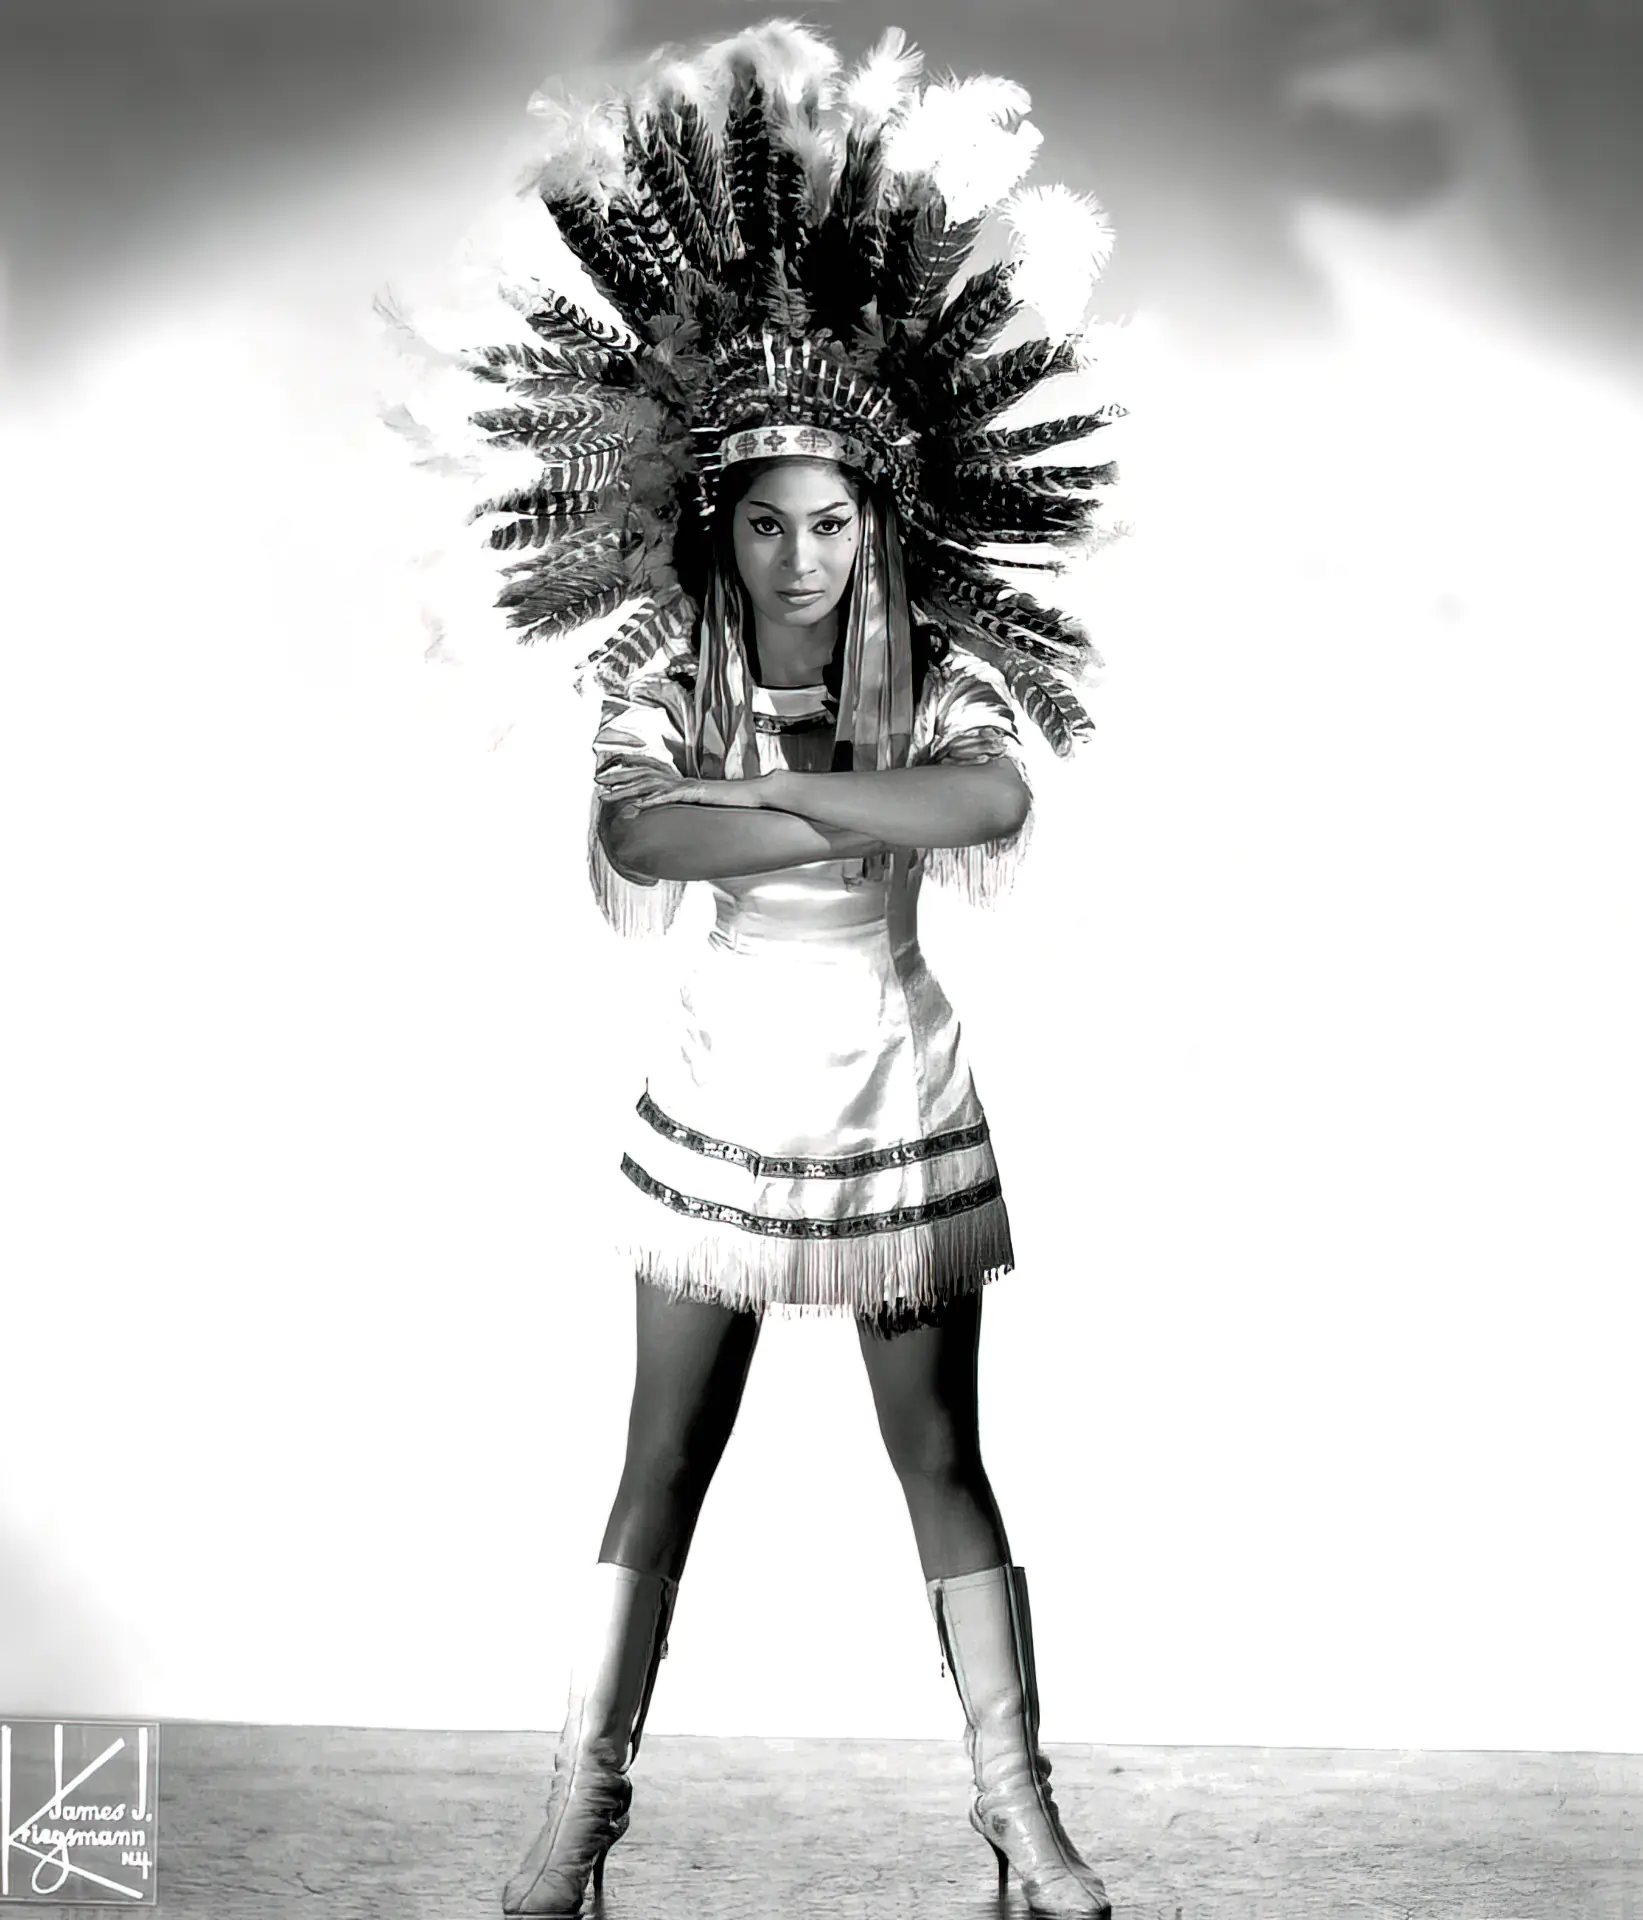 Sexy vintage babe poses with an Indian war bonnet